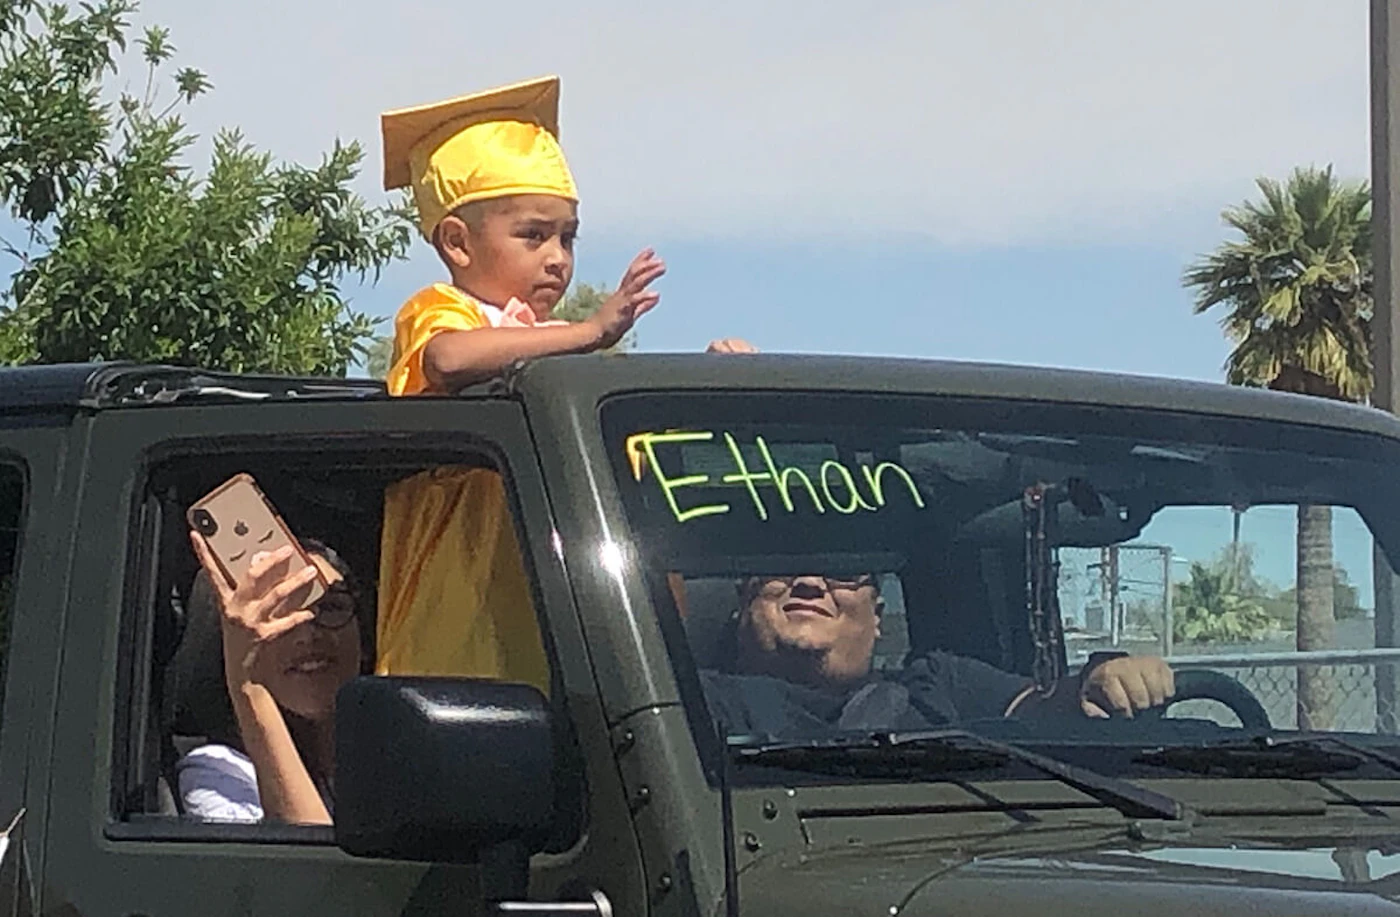 child in graduation cap and gown waves from a car's sunroof